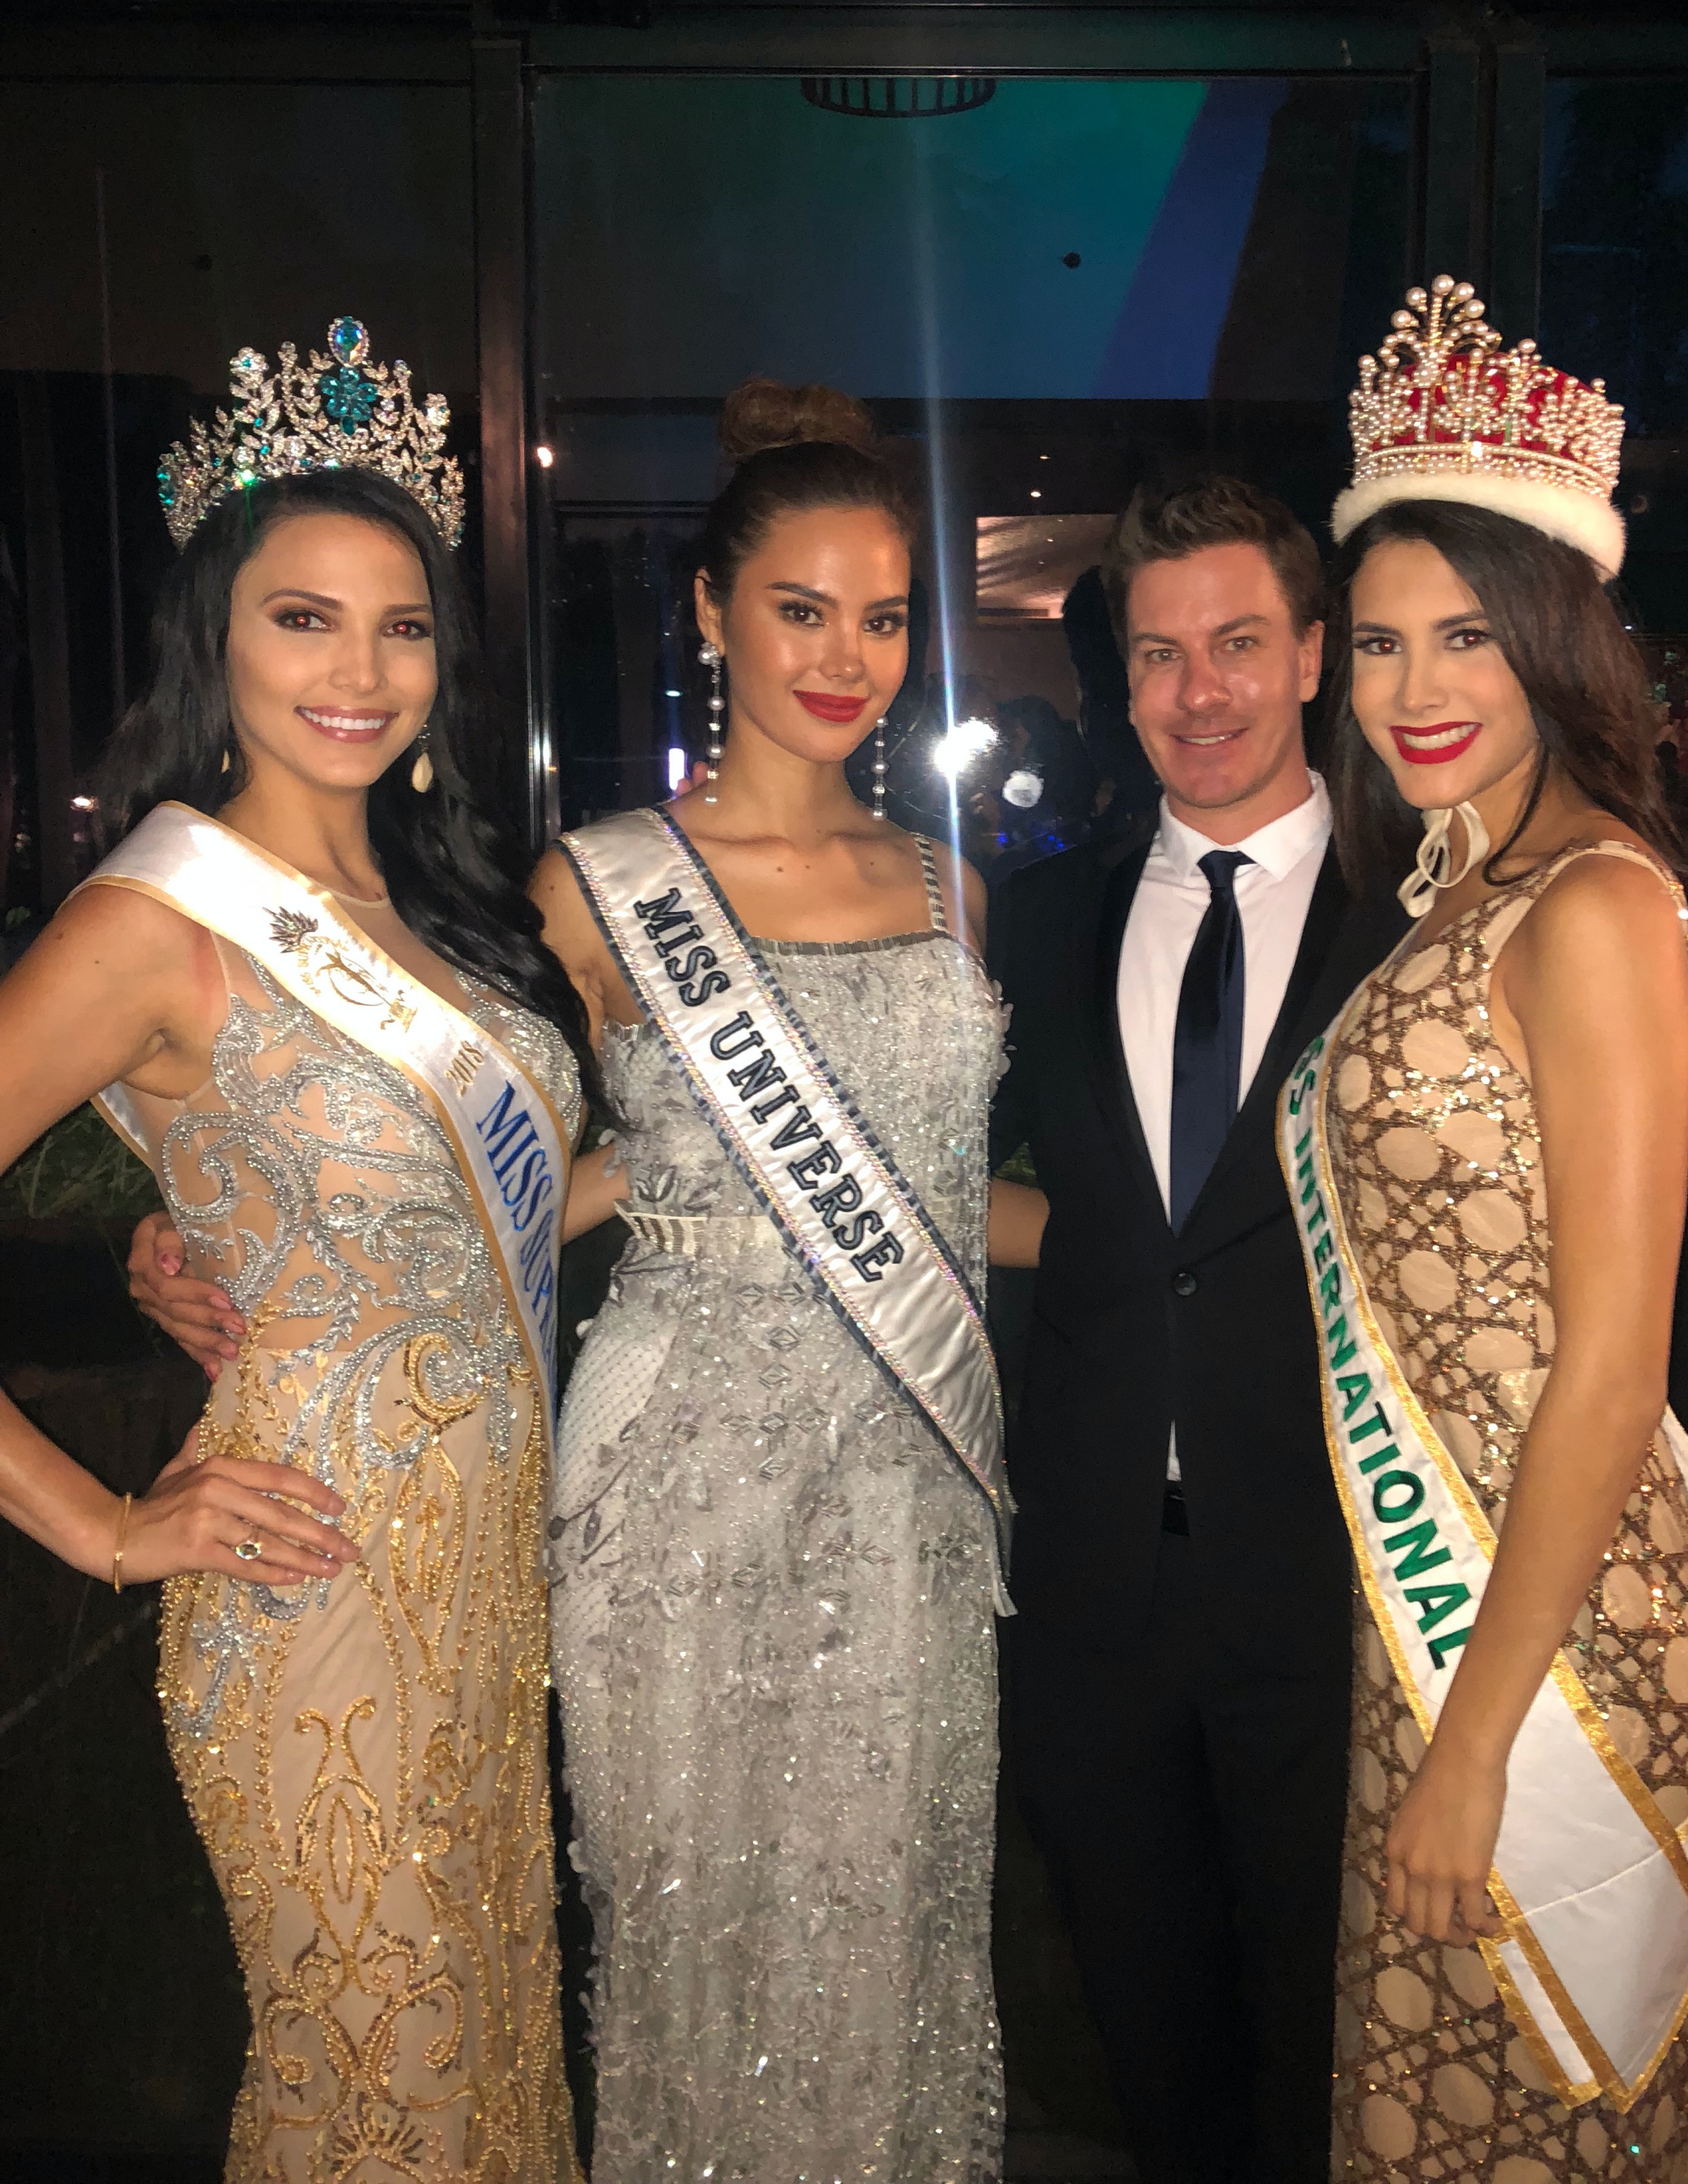 Andre Sleigh with Miss Supranational 2018 from Puerto Rico Valeria Vazquez, Miss Universe 2018 from the Philippines Catriona Gray and Miss International 2018 from Venezuela Mariem Velazco